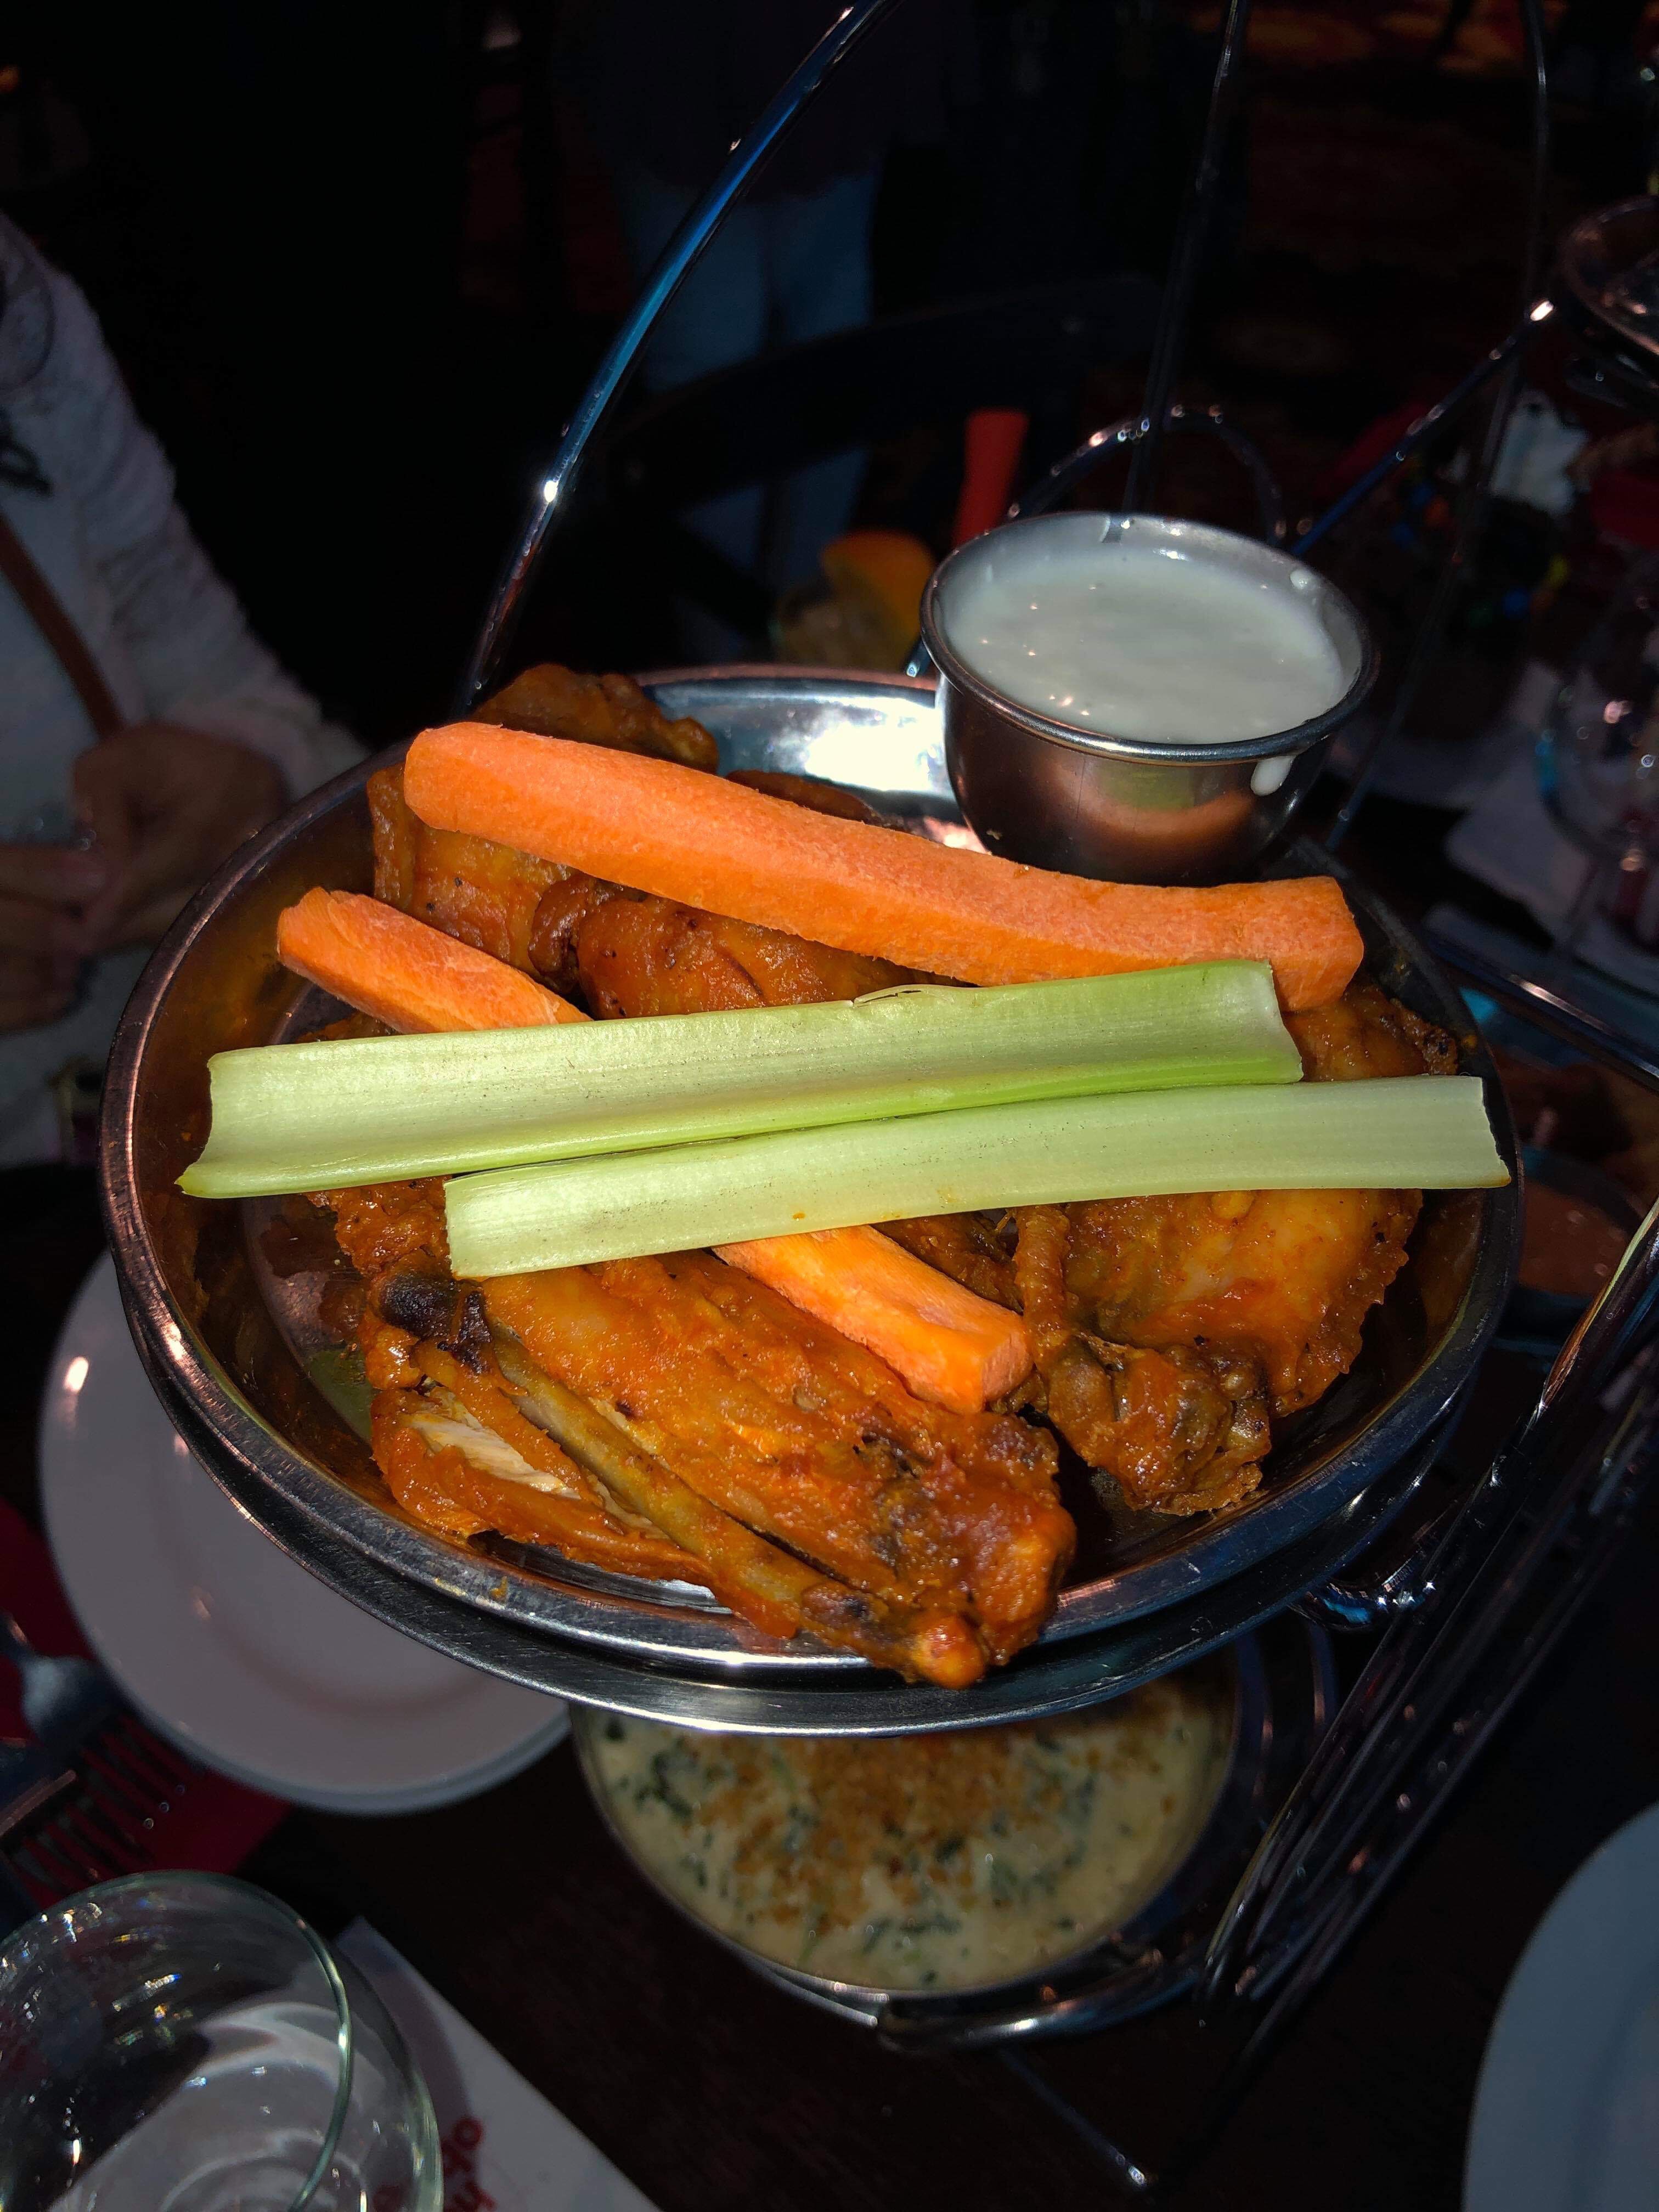 Out of this World Dining Experience at Planet Hollywood